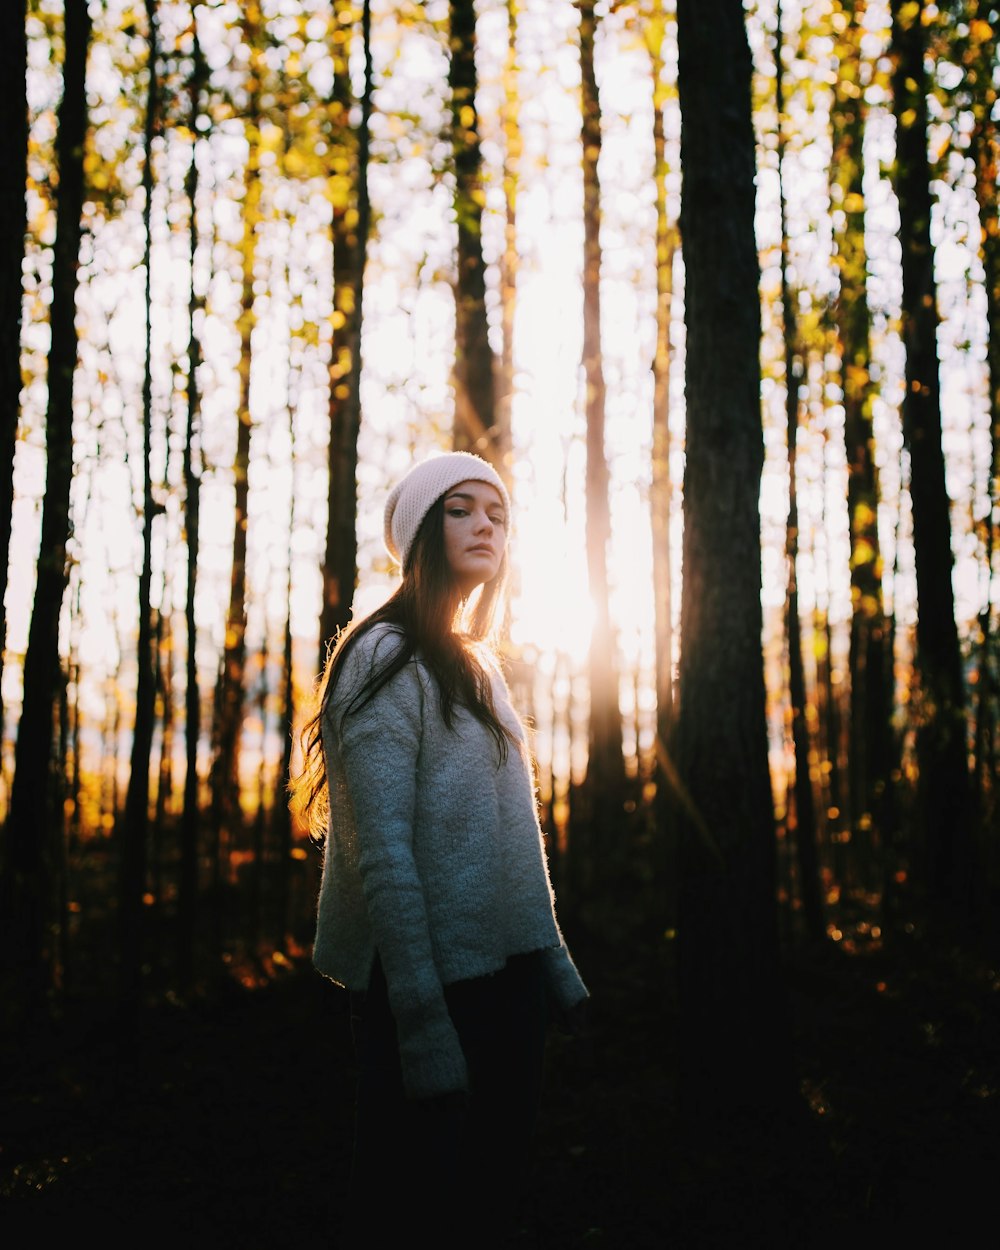 low-light photo of woman on forest